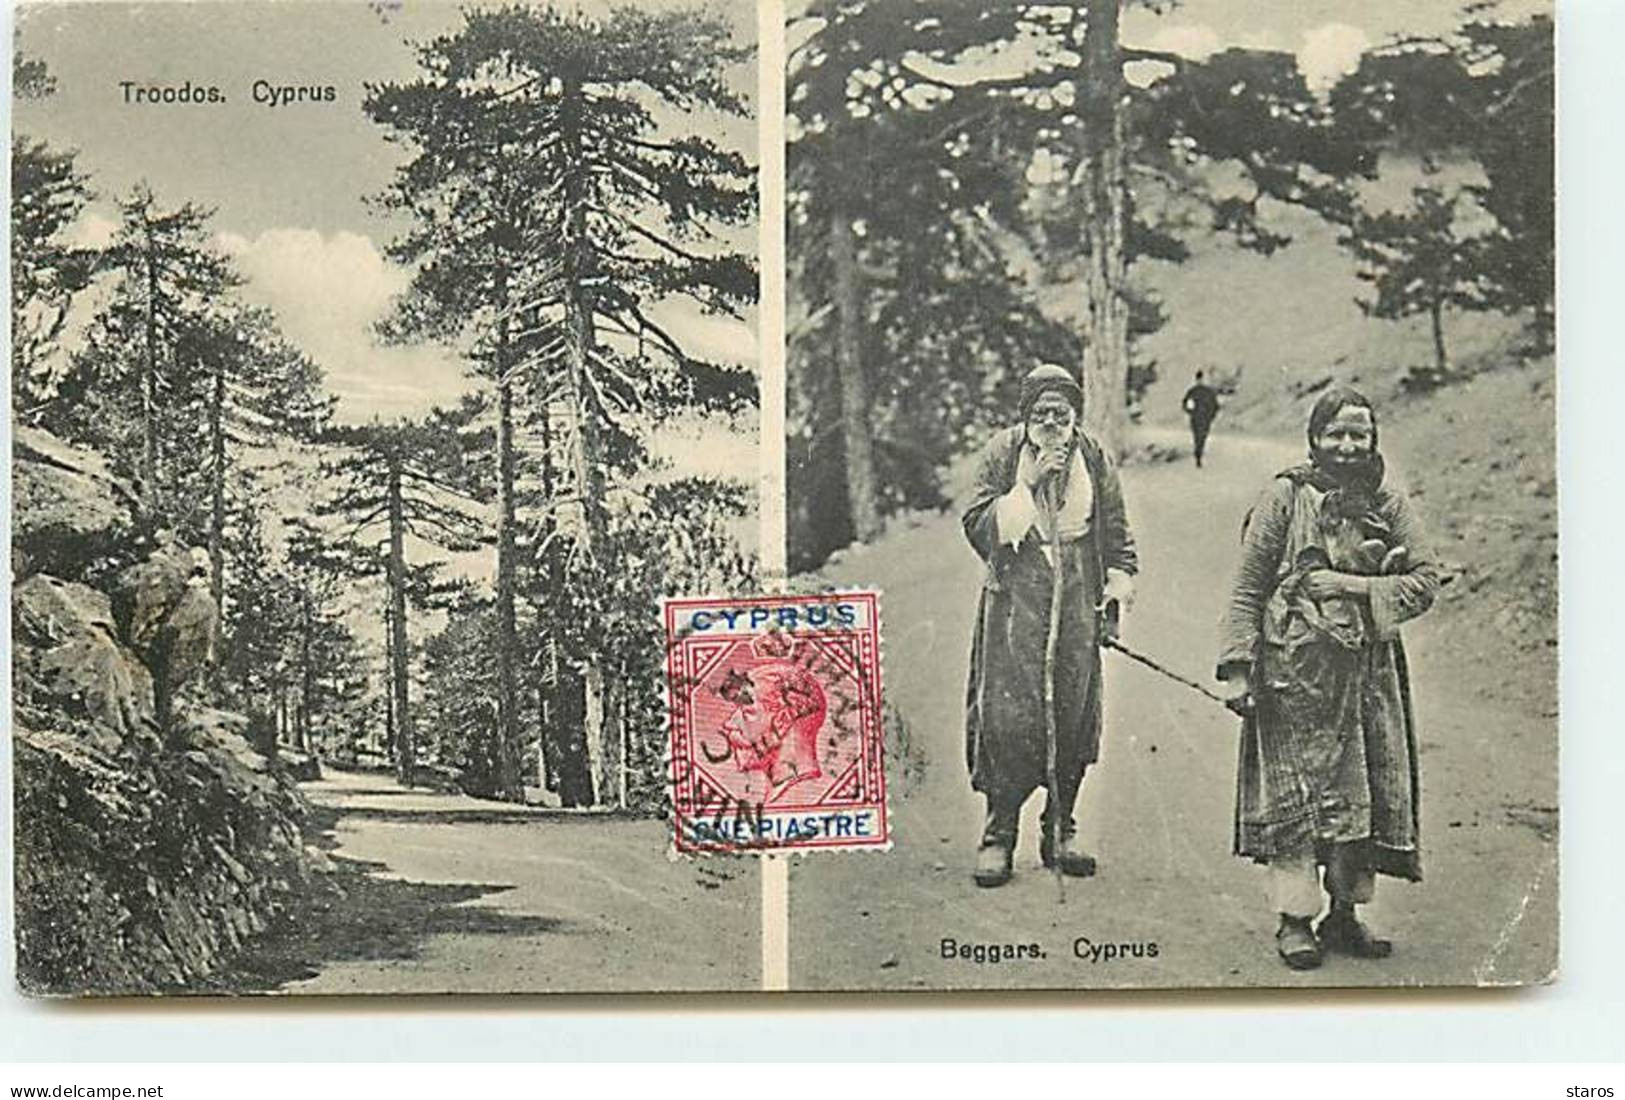 Chypre - Troodos - Beggars - Cyprus